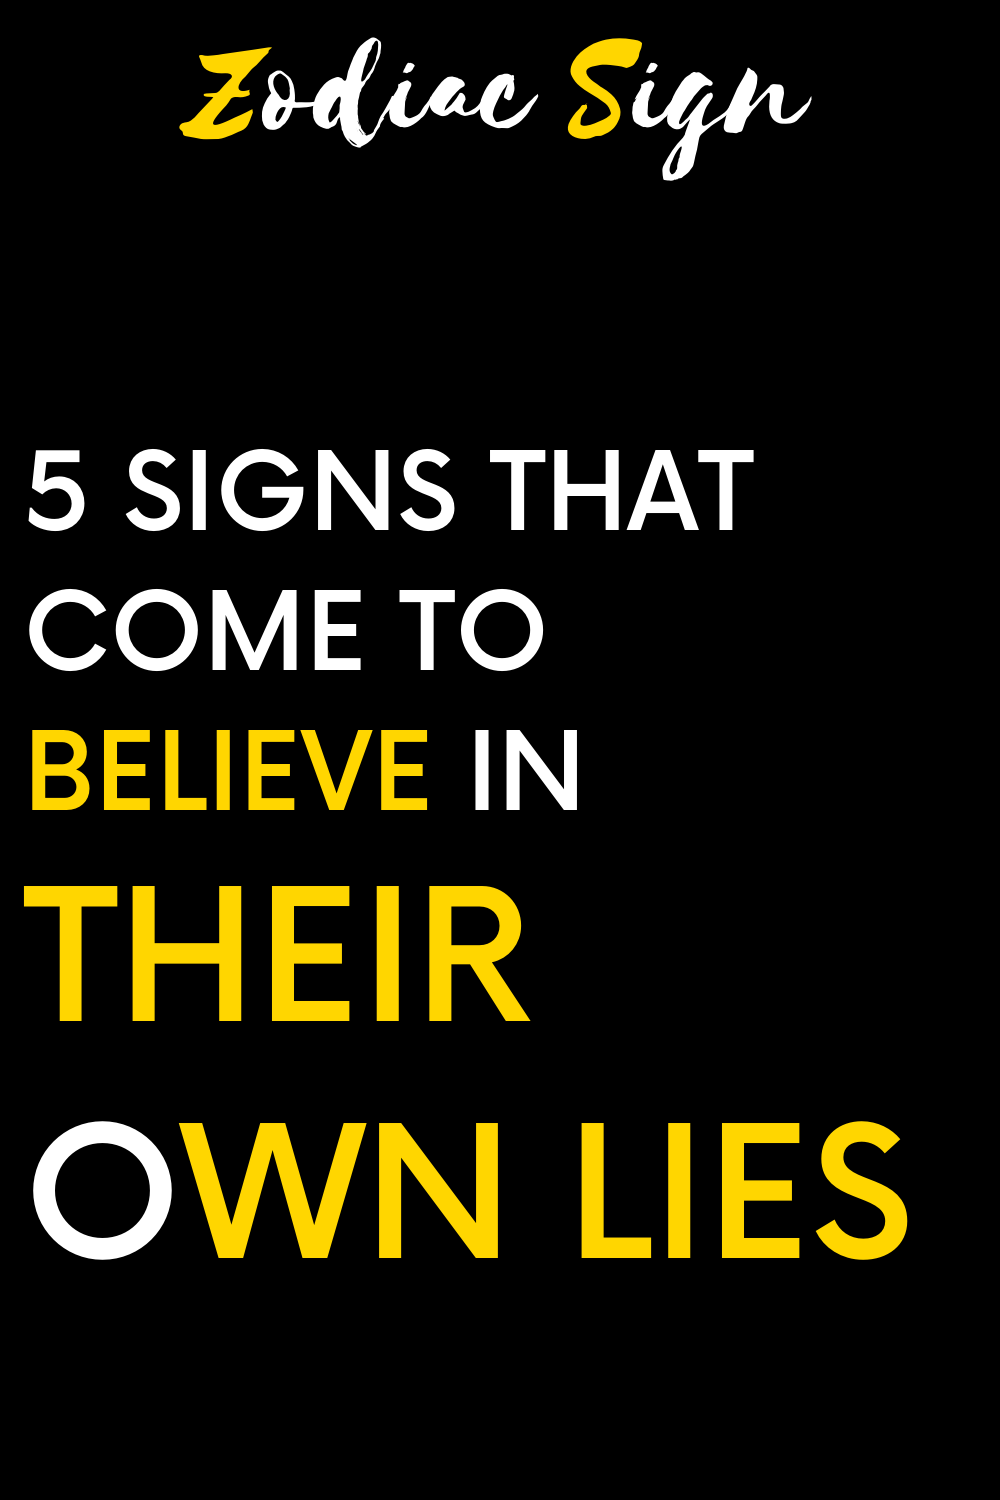 5 signs that come to believe in their own lies